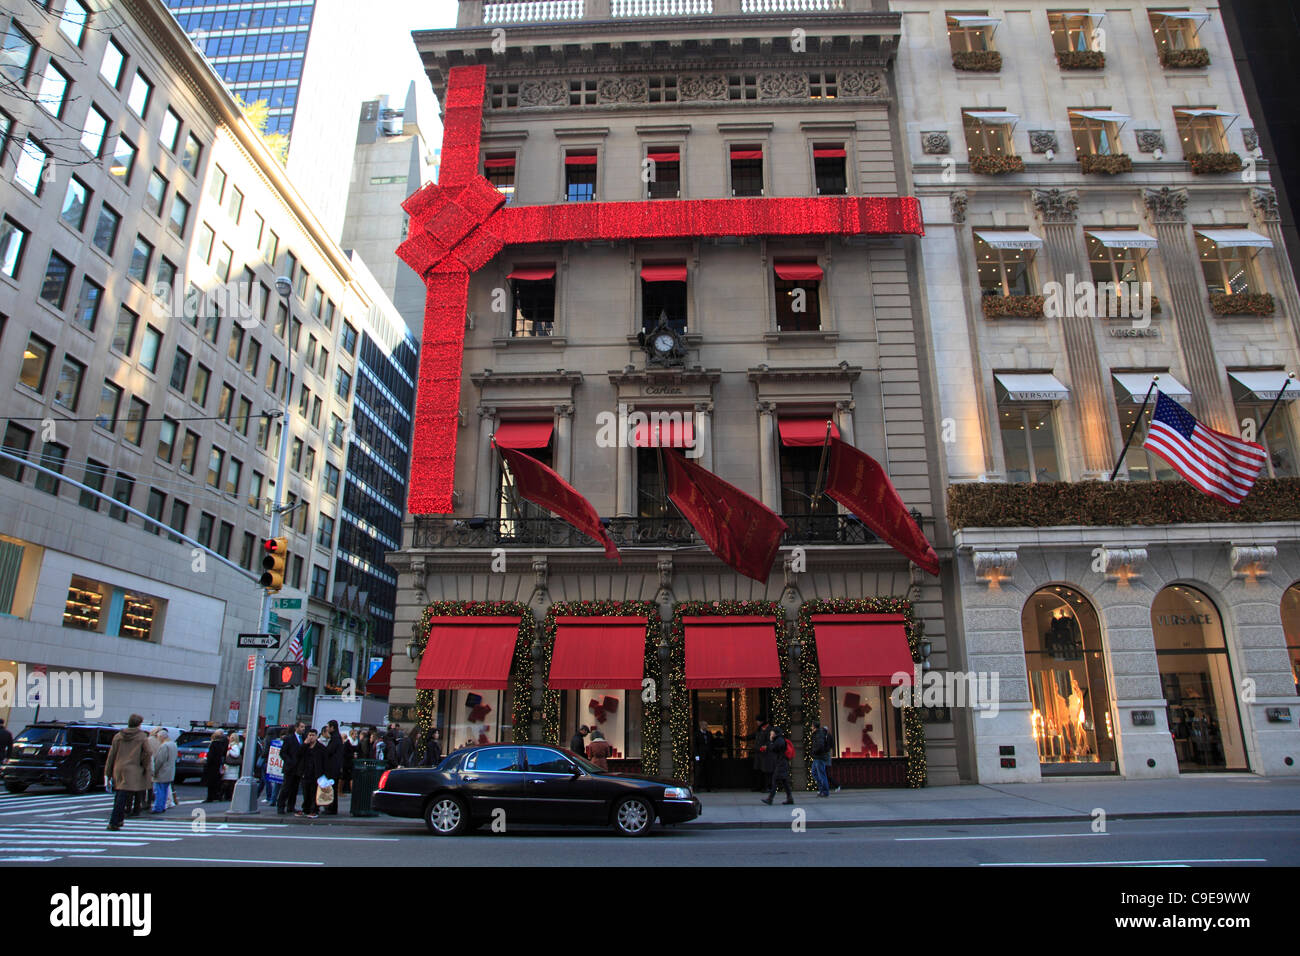 Cartier jewelry store decorated for 